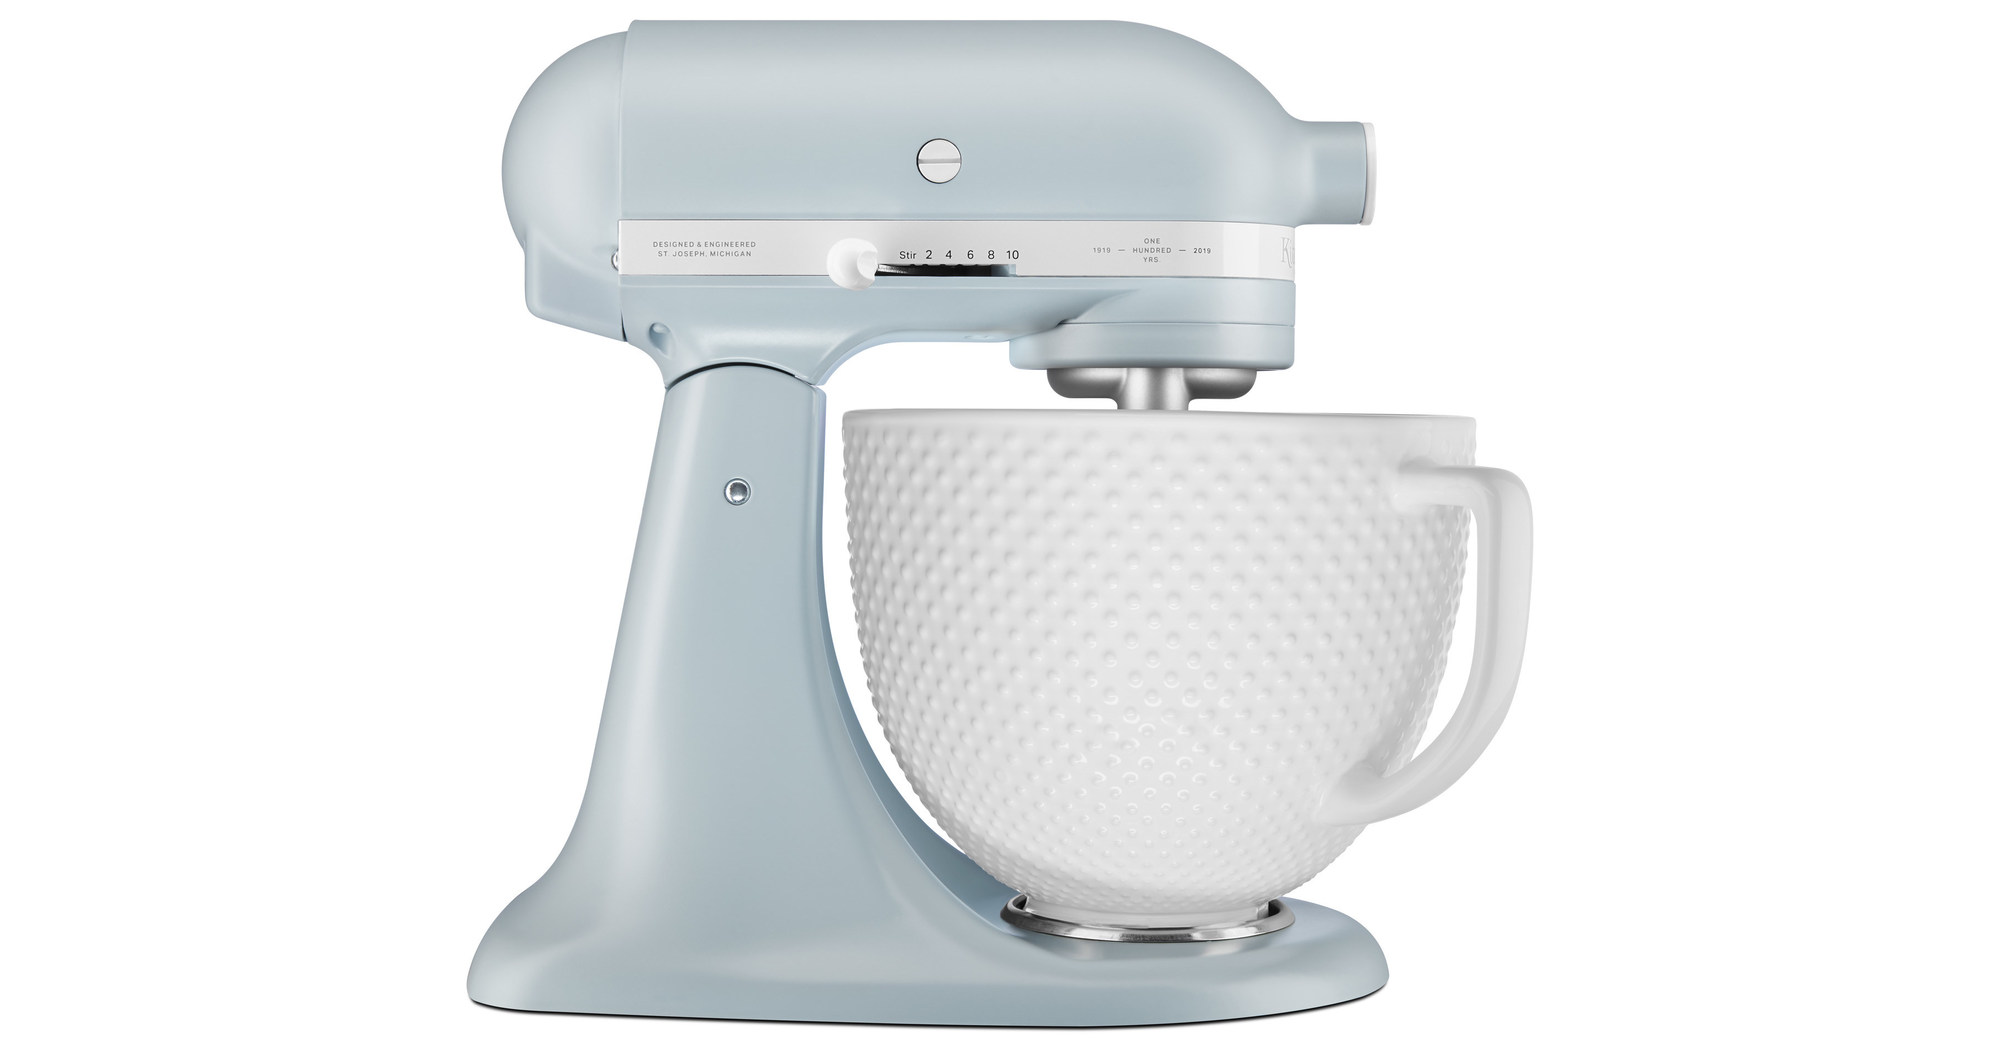 KitchenAid's New Limited Edition Mixer is Chic Enough for Your